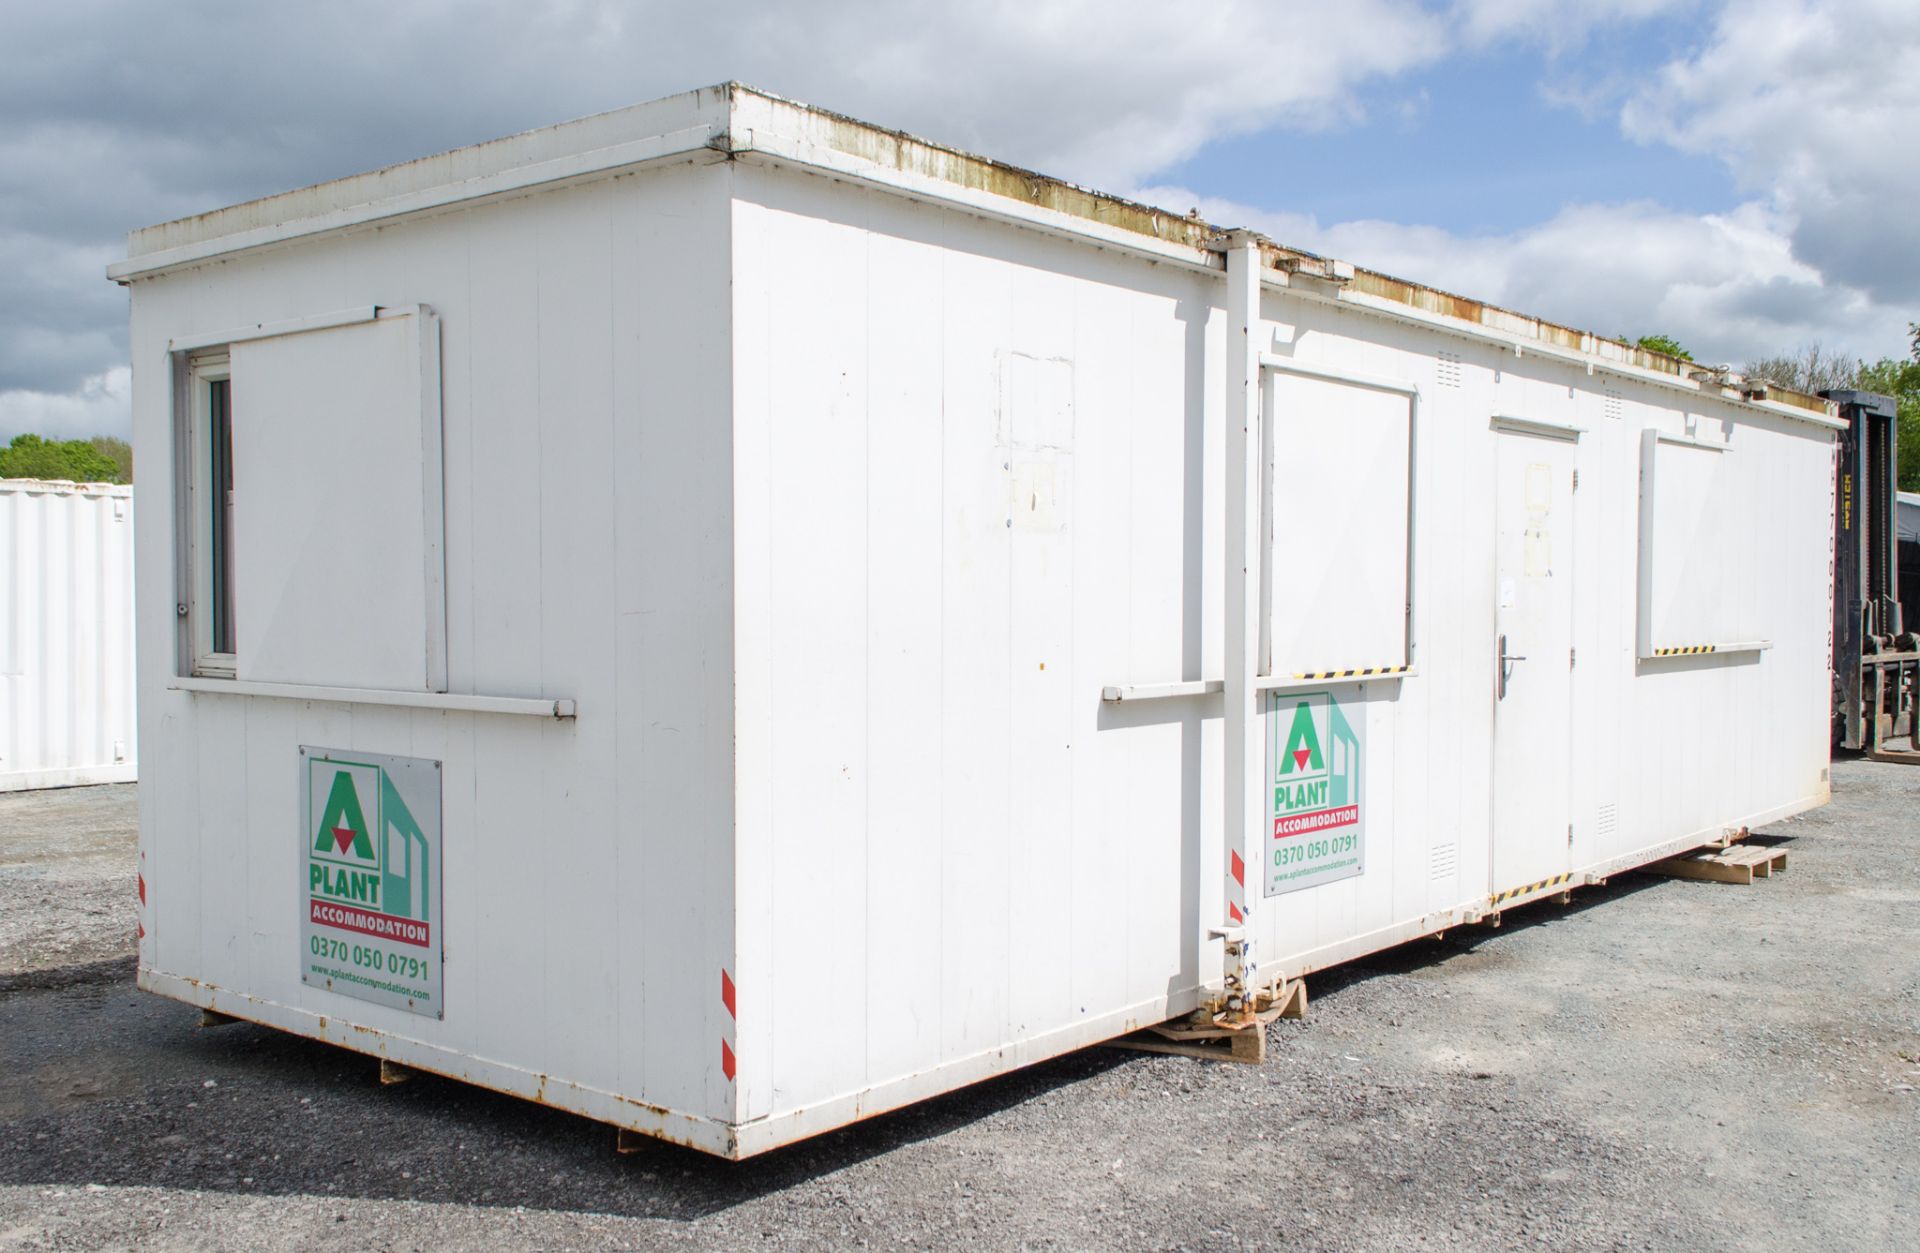 32 ft x 10 ft steel anti vandal jack leg office site unit Comprising of: Office/canteen area & - Image 2 of 7